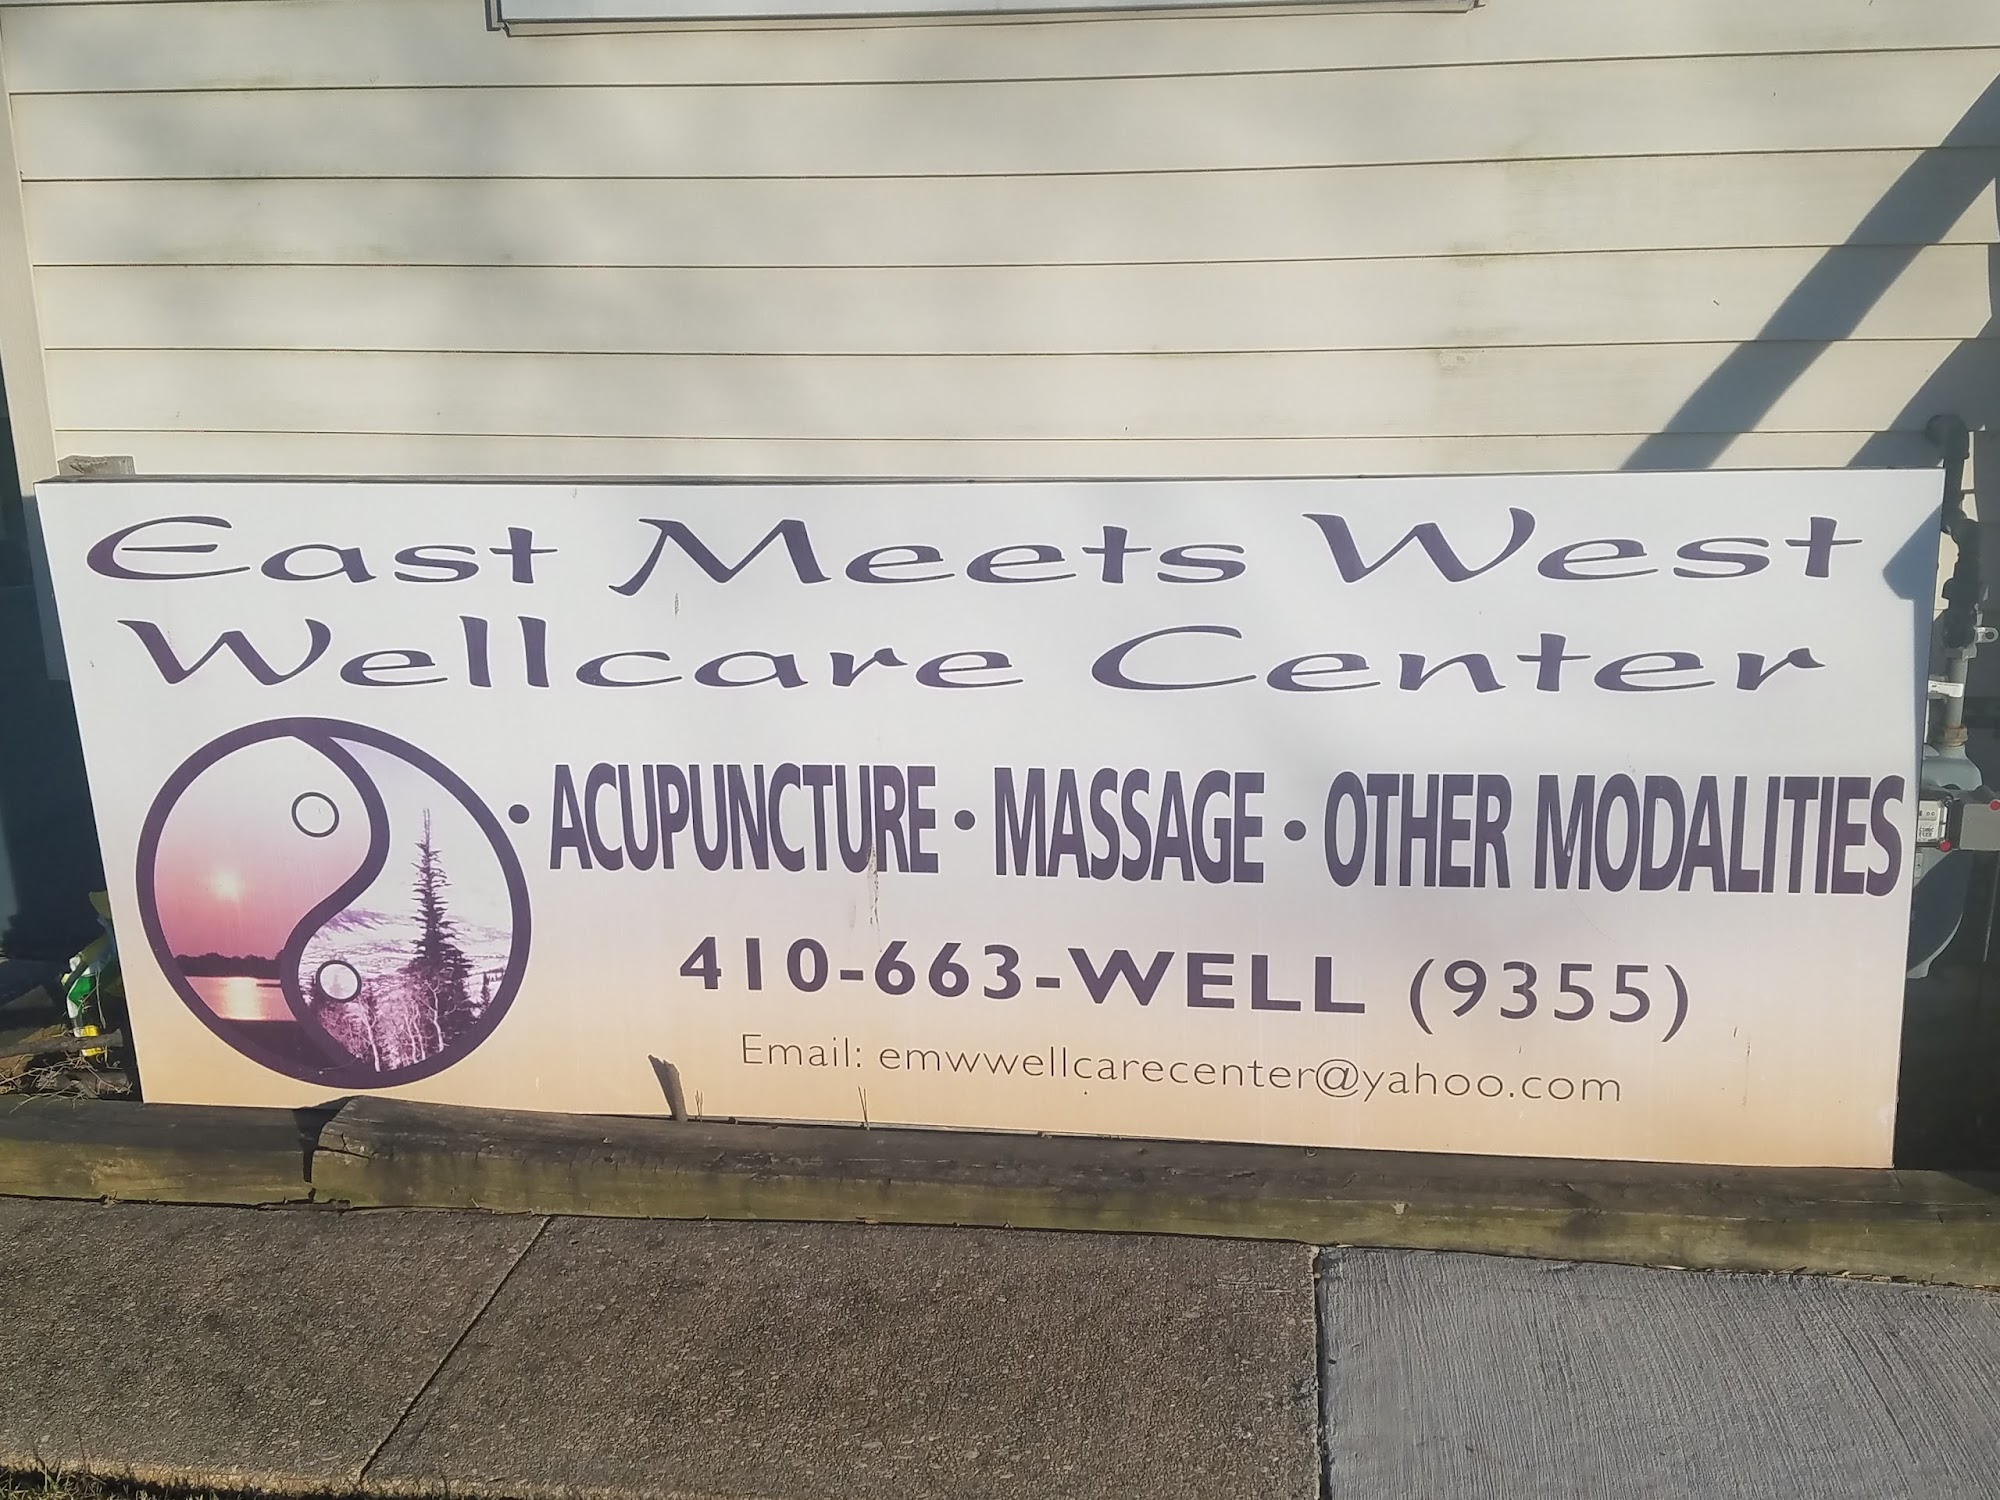 East Meets West Wellcare Center